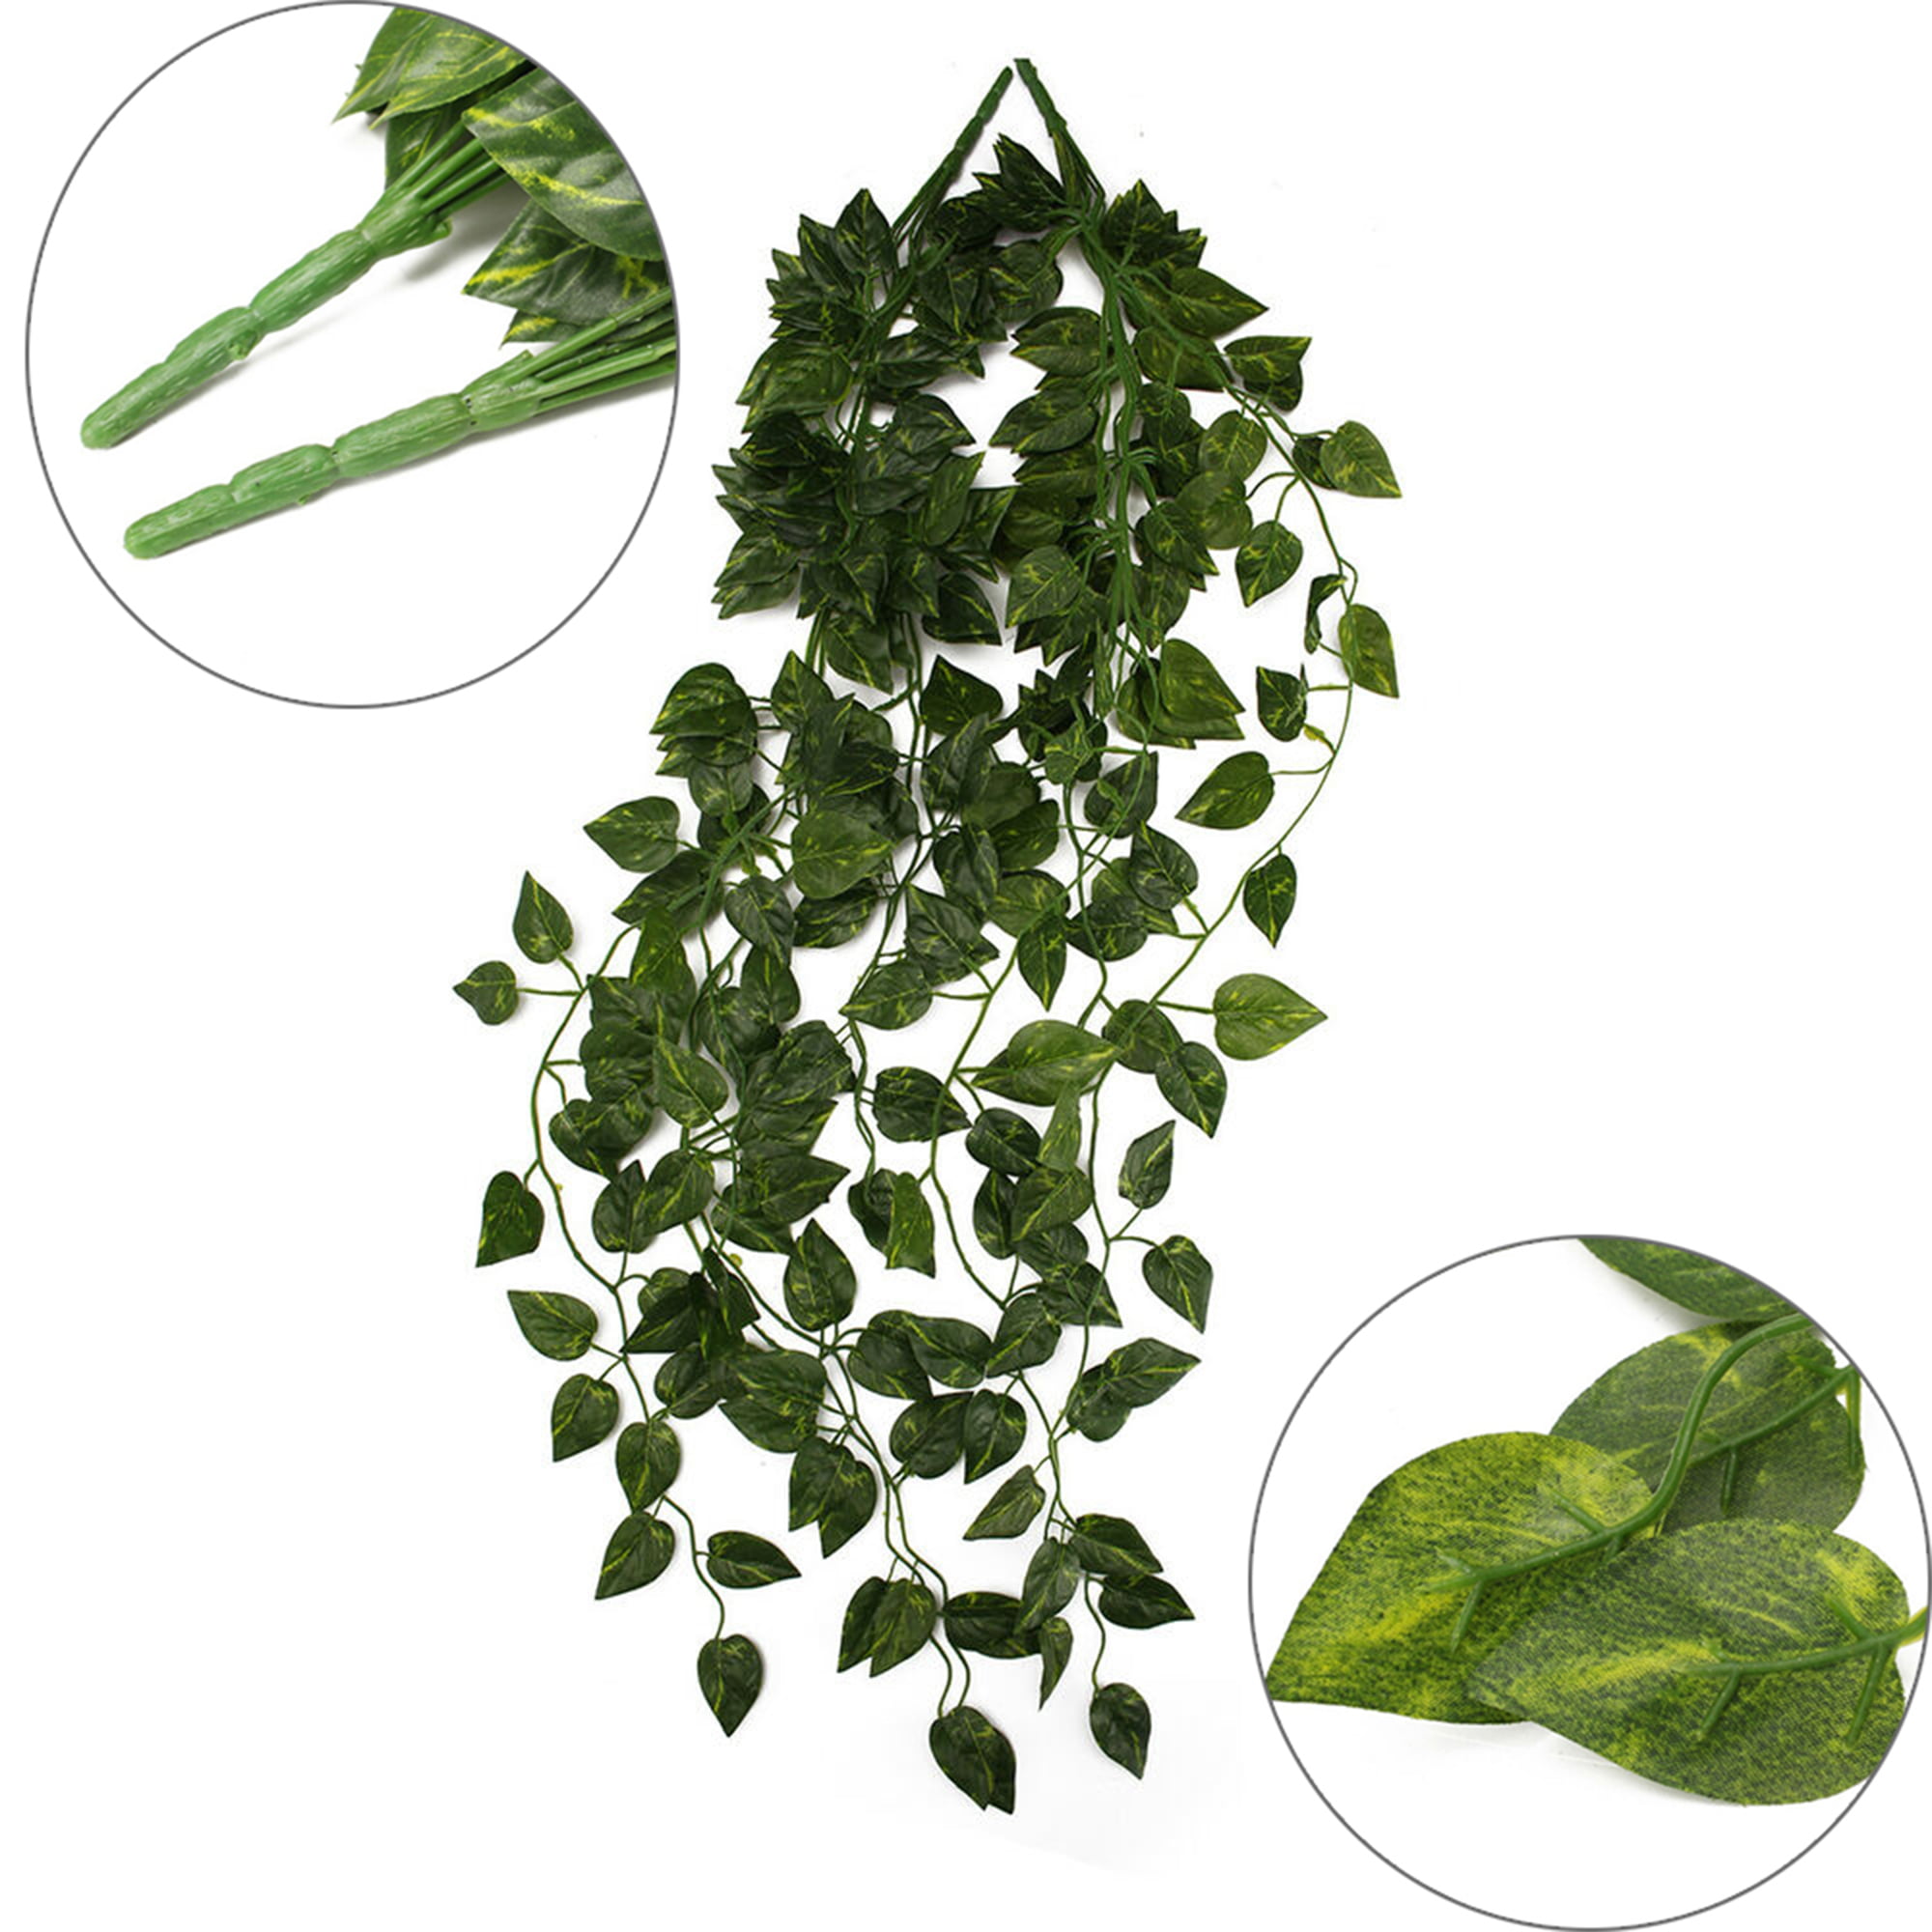 2 Bunches Begonia Leaf Vine Hangings Artificial Garland 